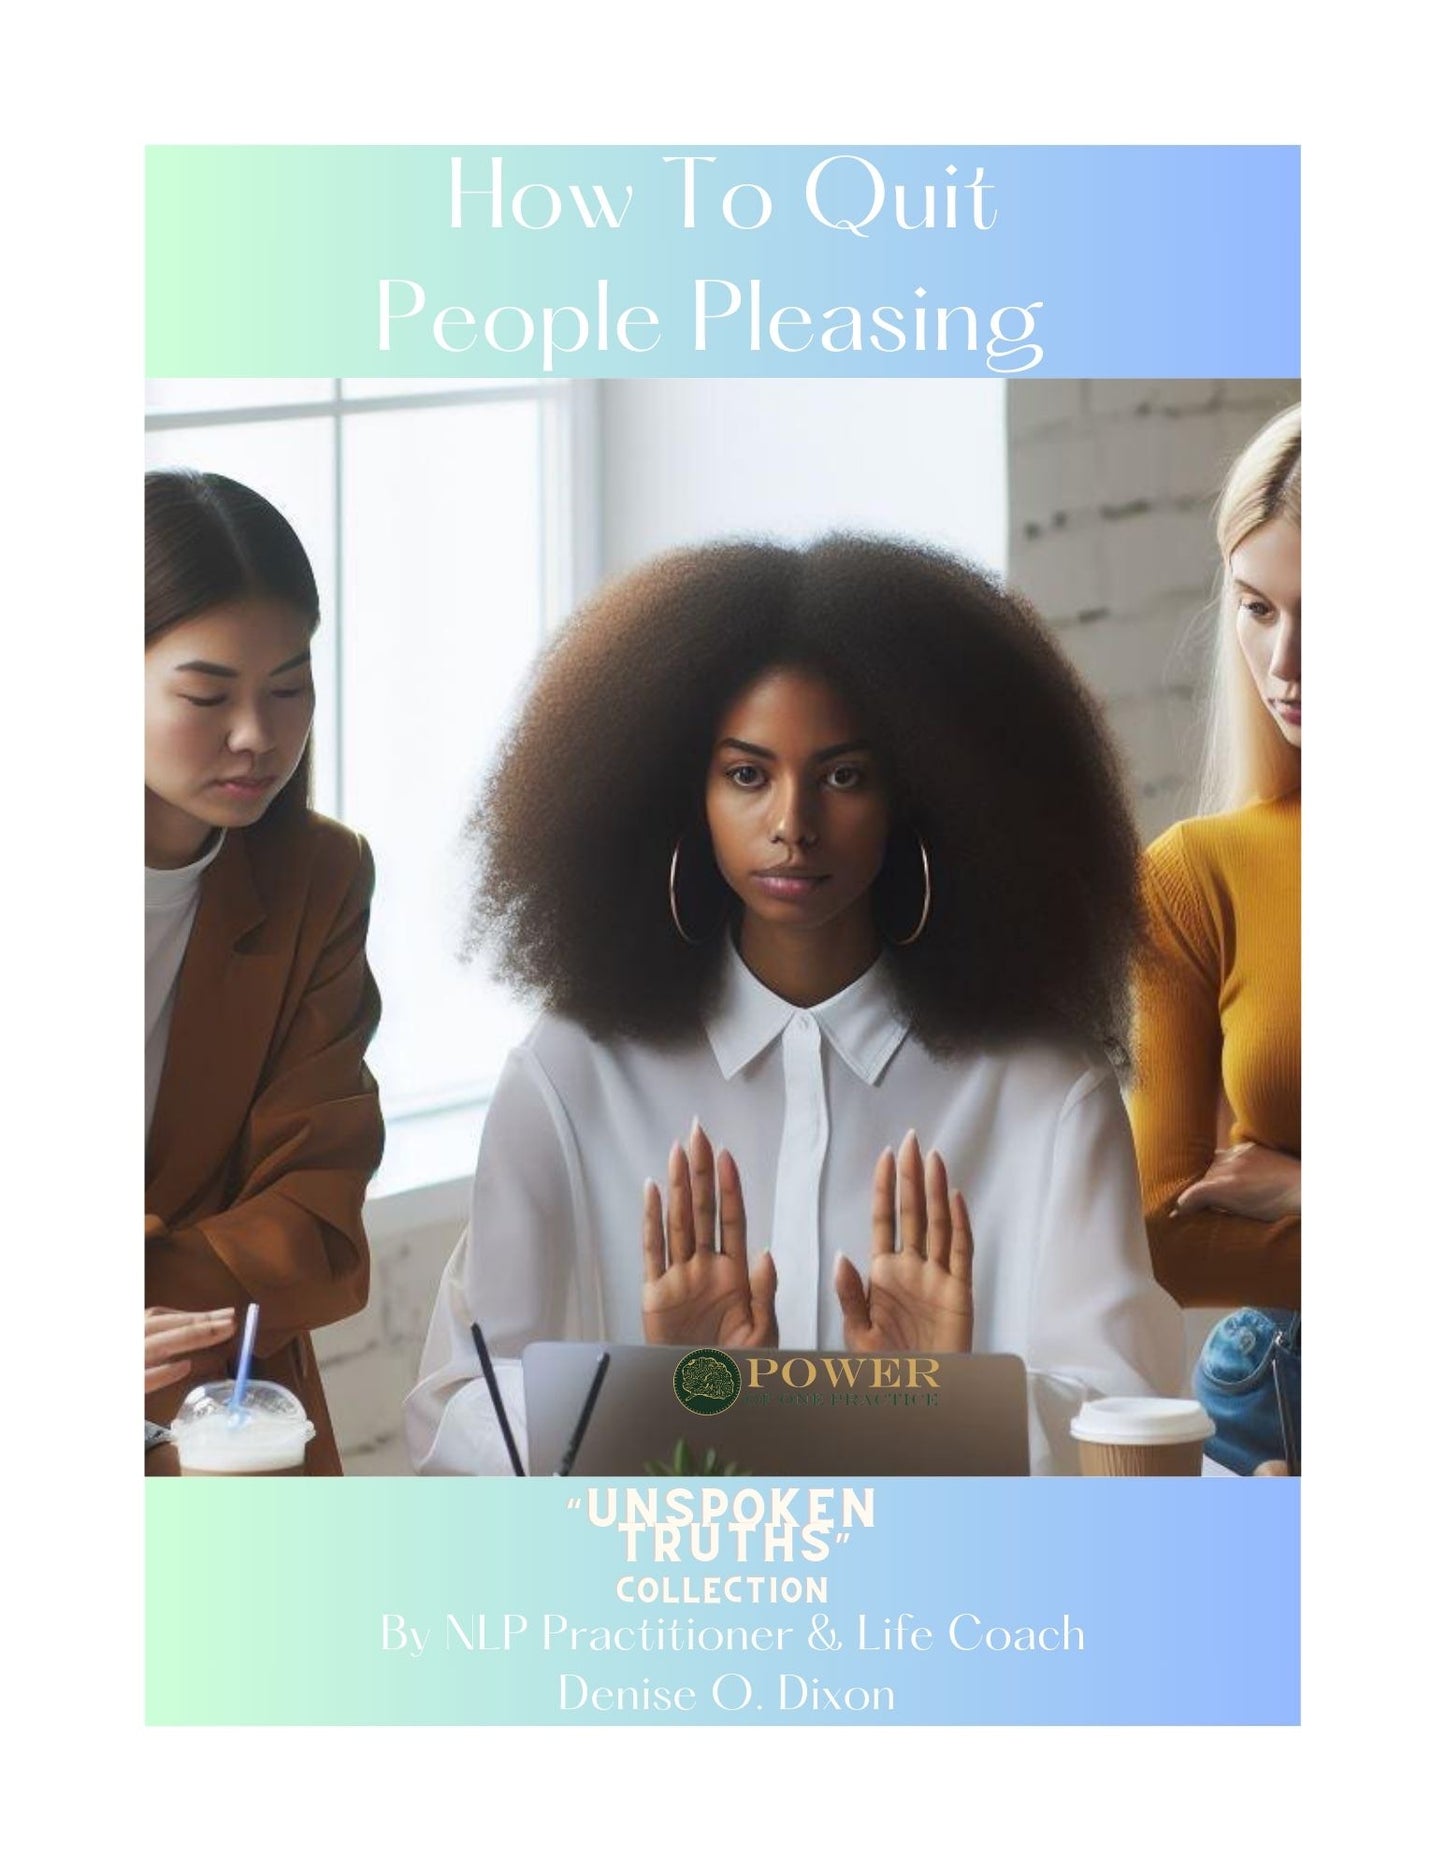 How to Quit People Pleasing